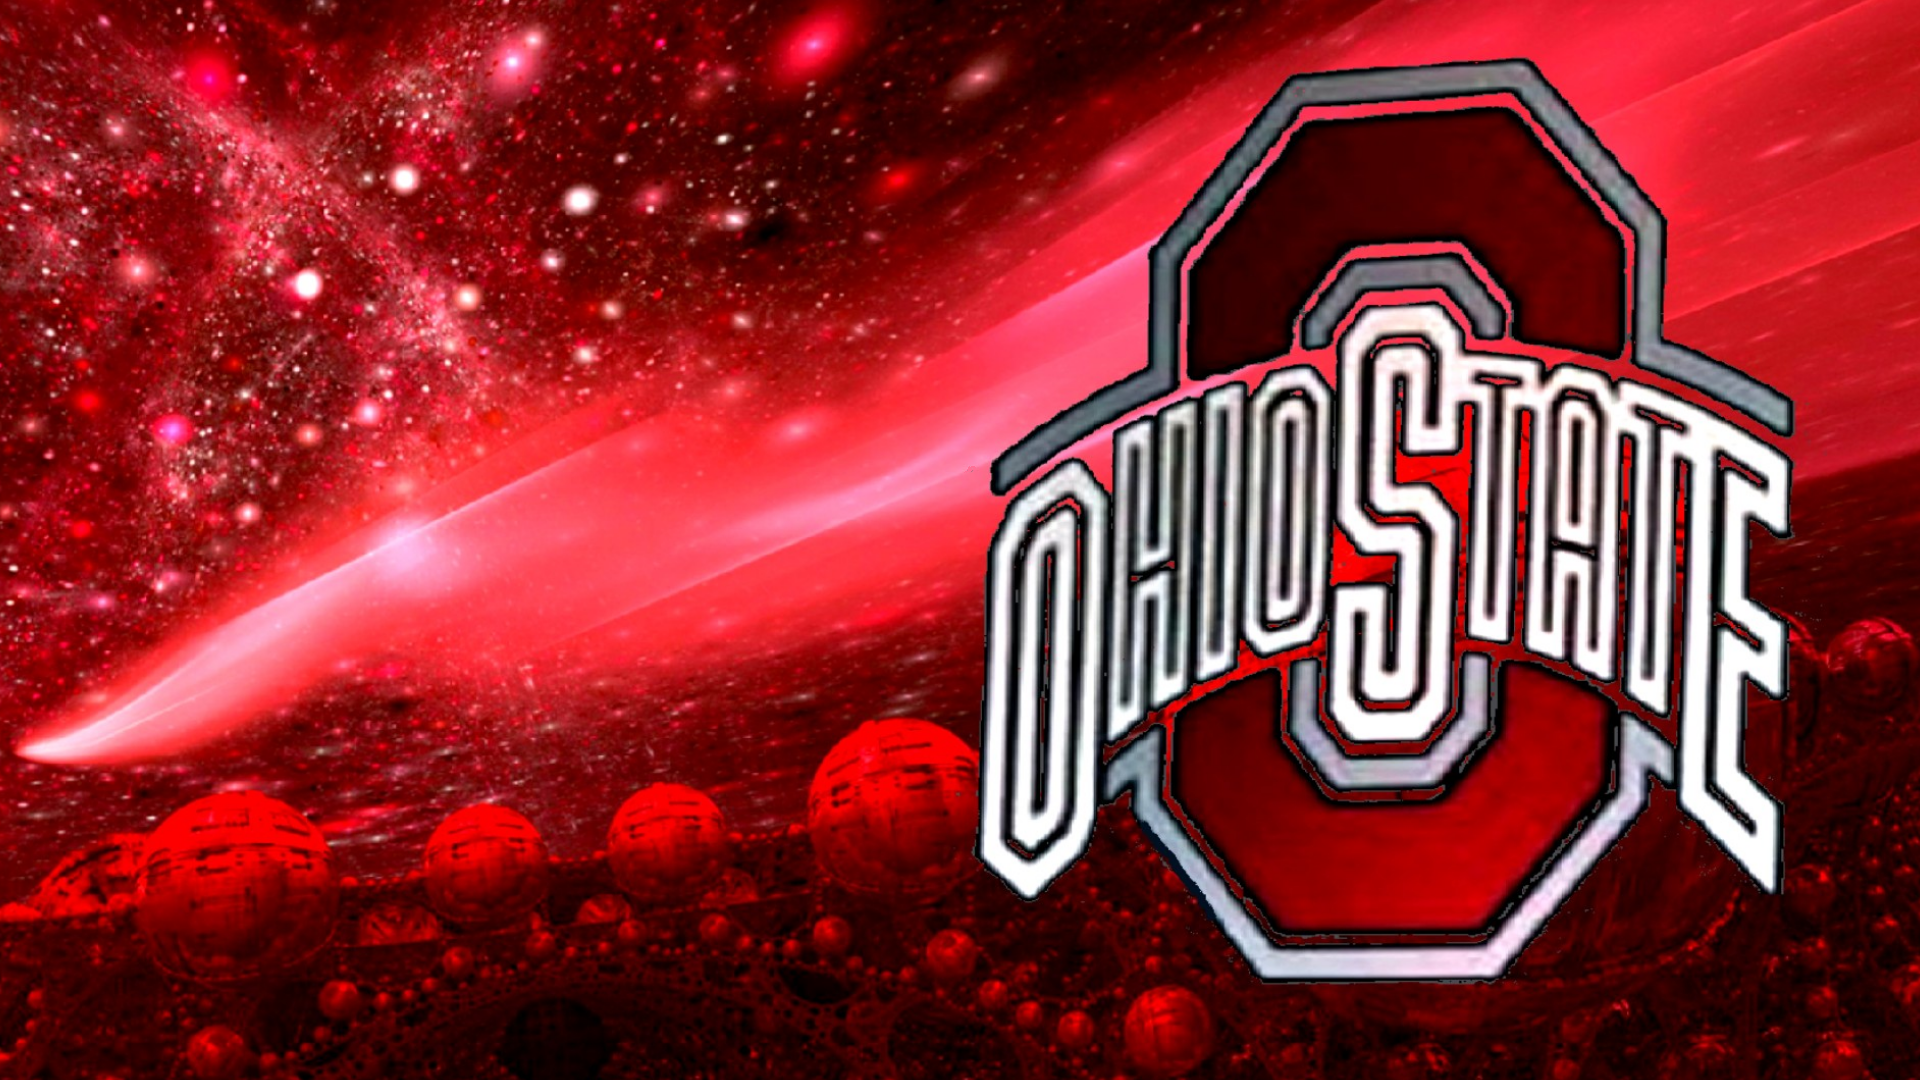 Free download 3D Ohio State Football Desktop and mobile wallpaper Wallippo [1920x1080] for your Desktop, Mobile & Tablet. Explore Ohio State Desktop Wallpaper. Ohio State Football Wallpaper Picture, Ohio